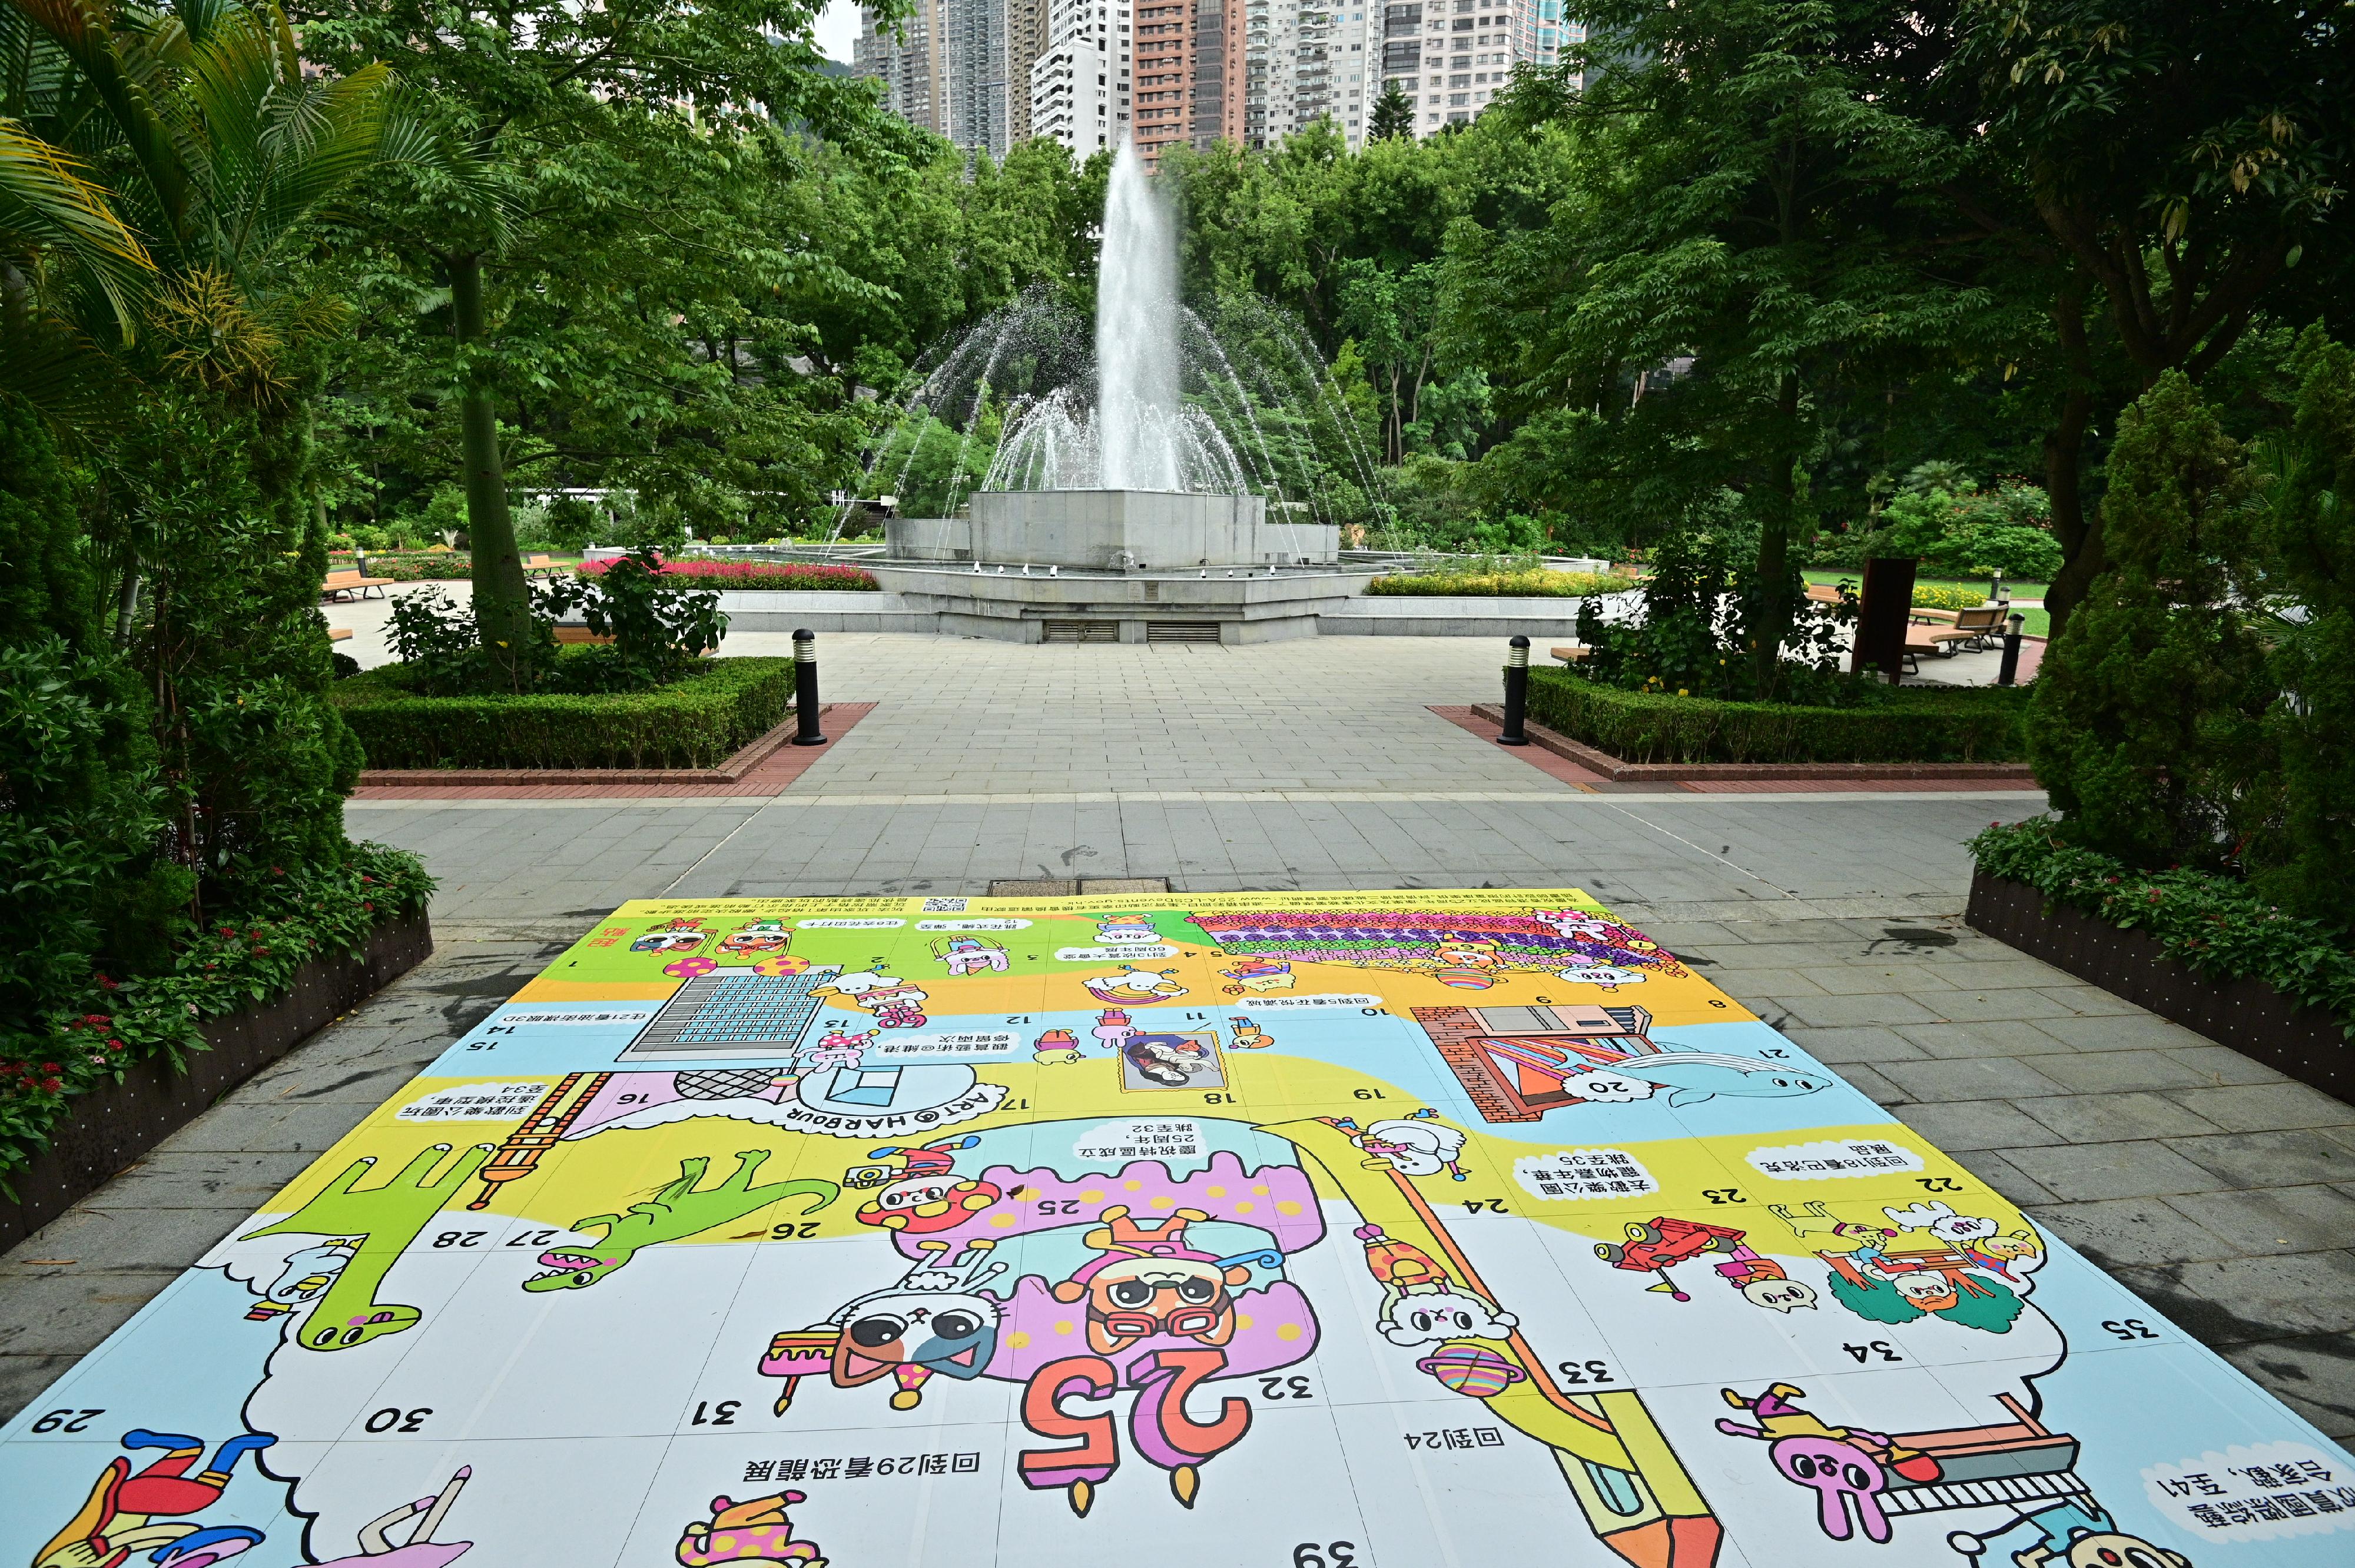 To celebrate the 25th anniversary of the establishment of the Hong Kong Special Administrative Region of the People's Republic of China, the Leisure and Cultural Services Department (LCSD) has invited an illustrator to design a board game with the theme of celebration activities organised by the LCSD, and adapt the board game to floor stickers. The floor stickers will be installed at nine LCSD leisure and cultural venues in phases for members of the public to share the joy of Hong Kong's return to the motherland. Photo shows the board game floor sticker located at the Hong Kong Zoological and Botanical Gardens.